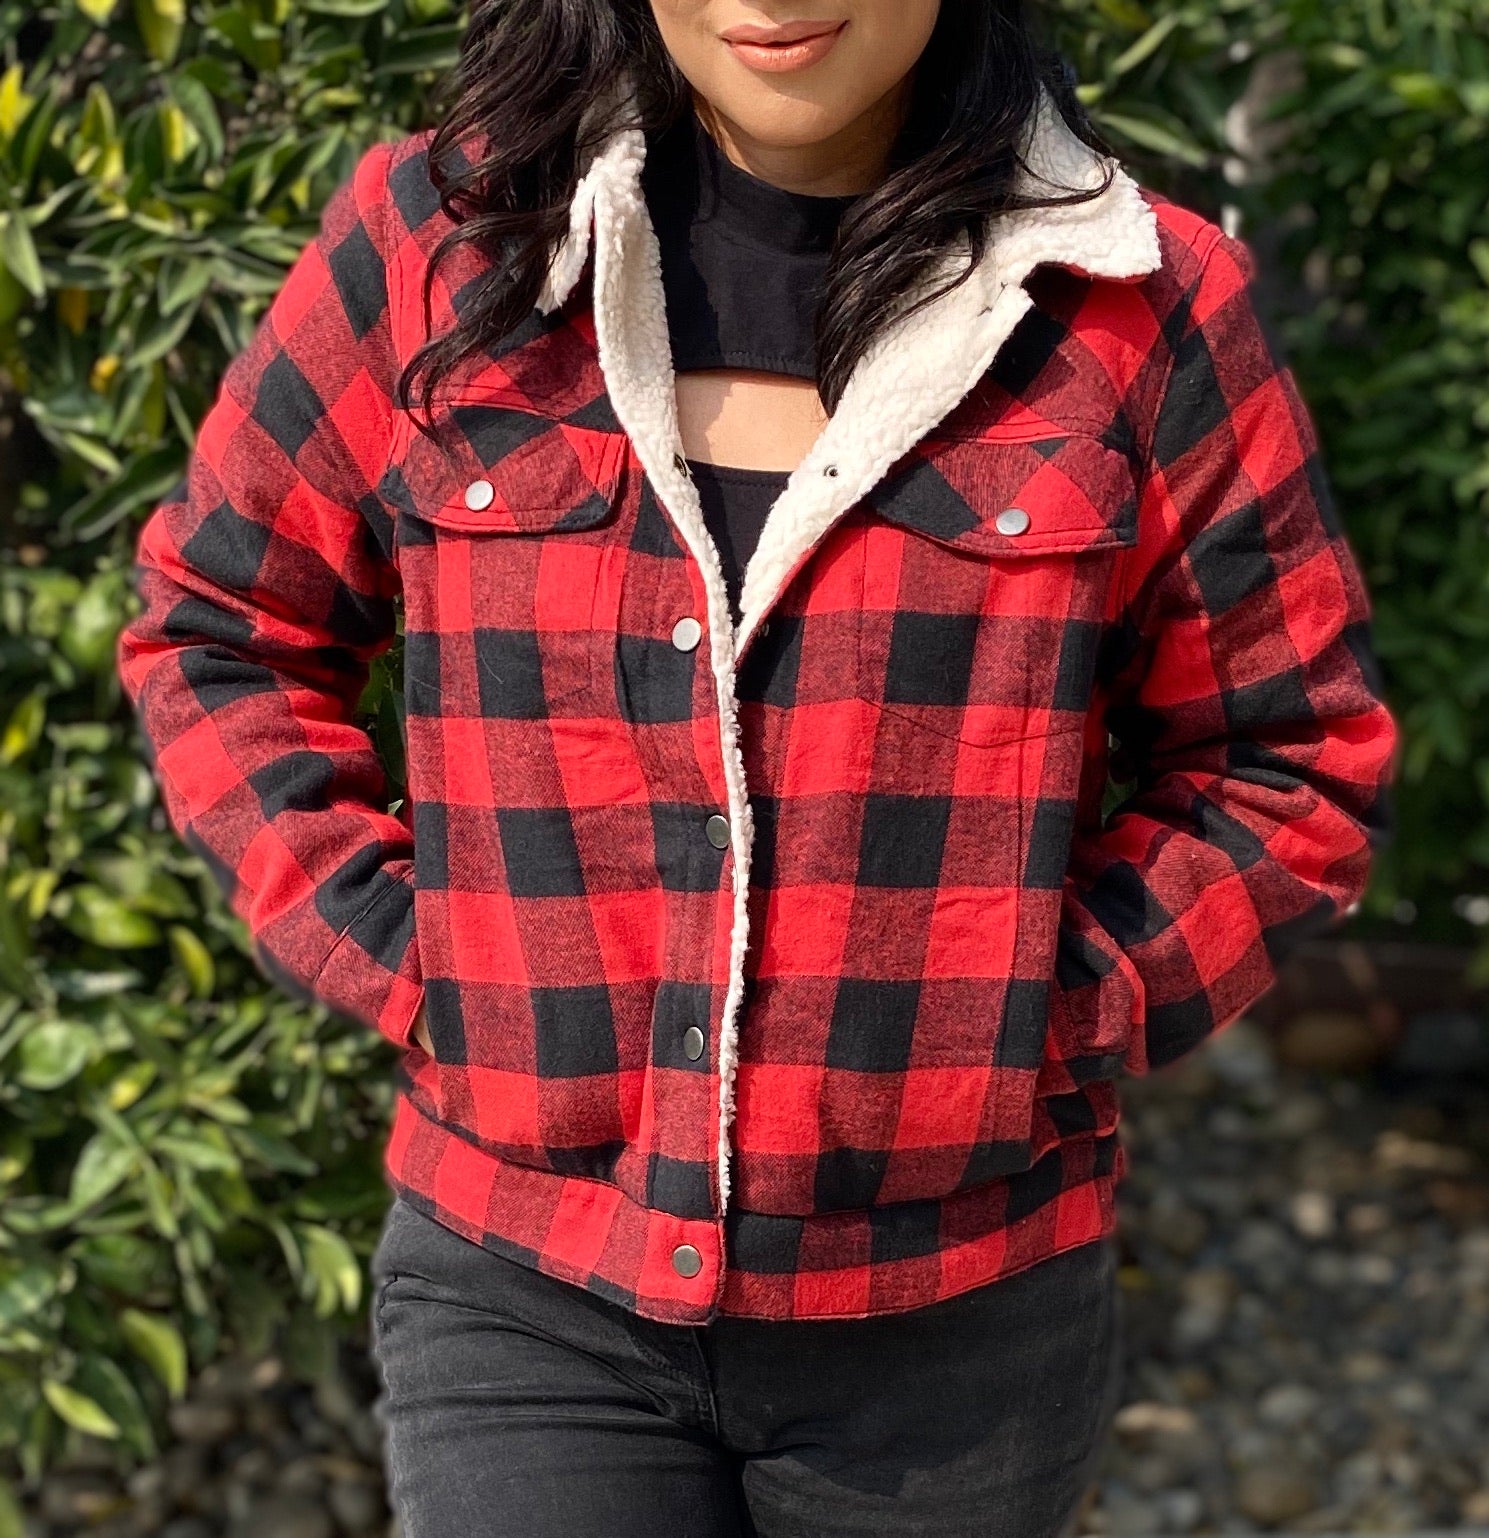 Tahoe Cabin Fever Outdoor Plaid is Print Winter Jacket (red